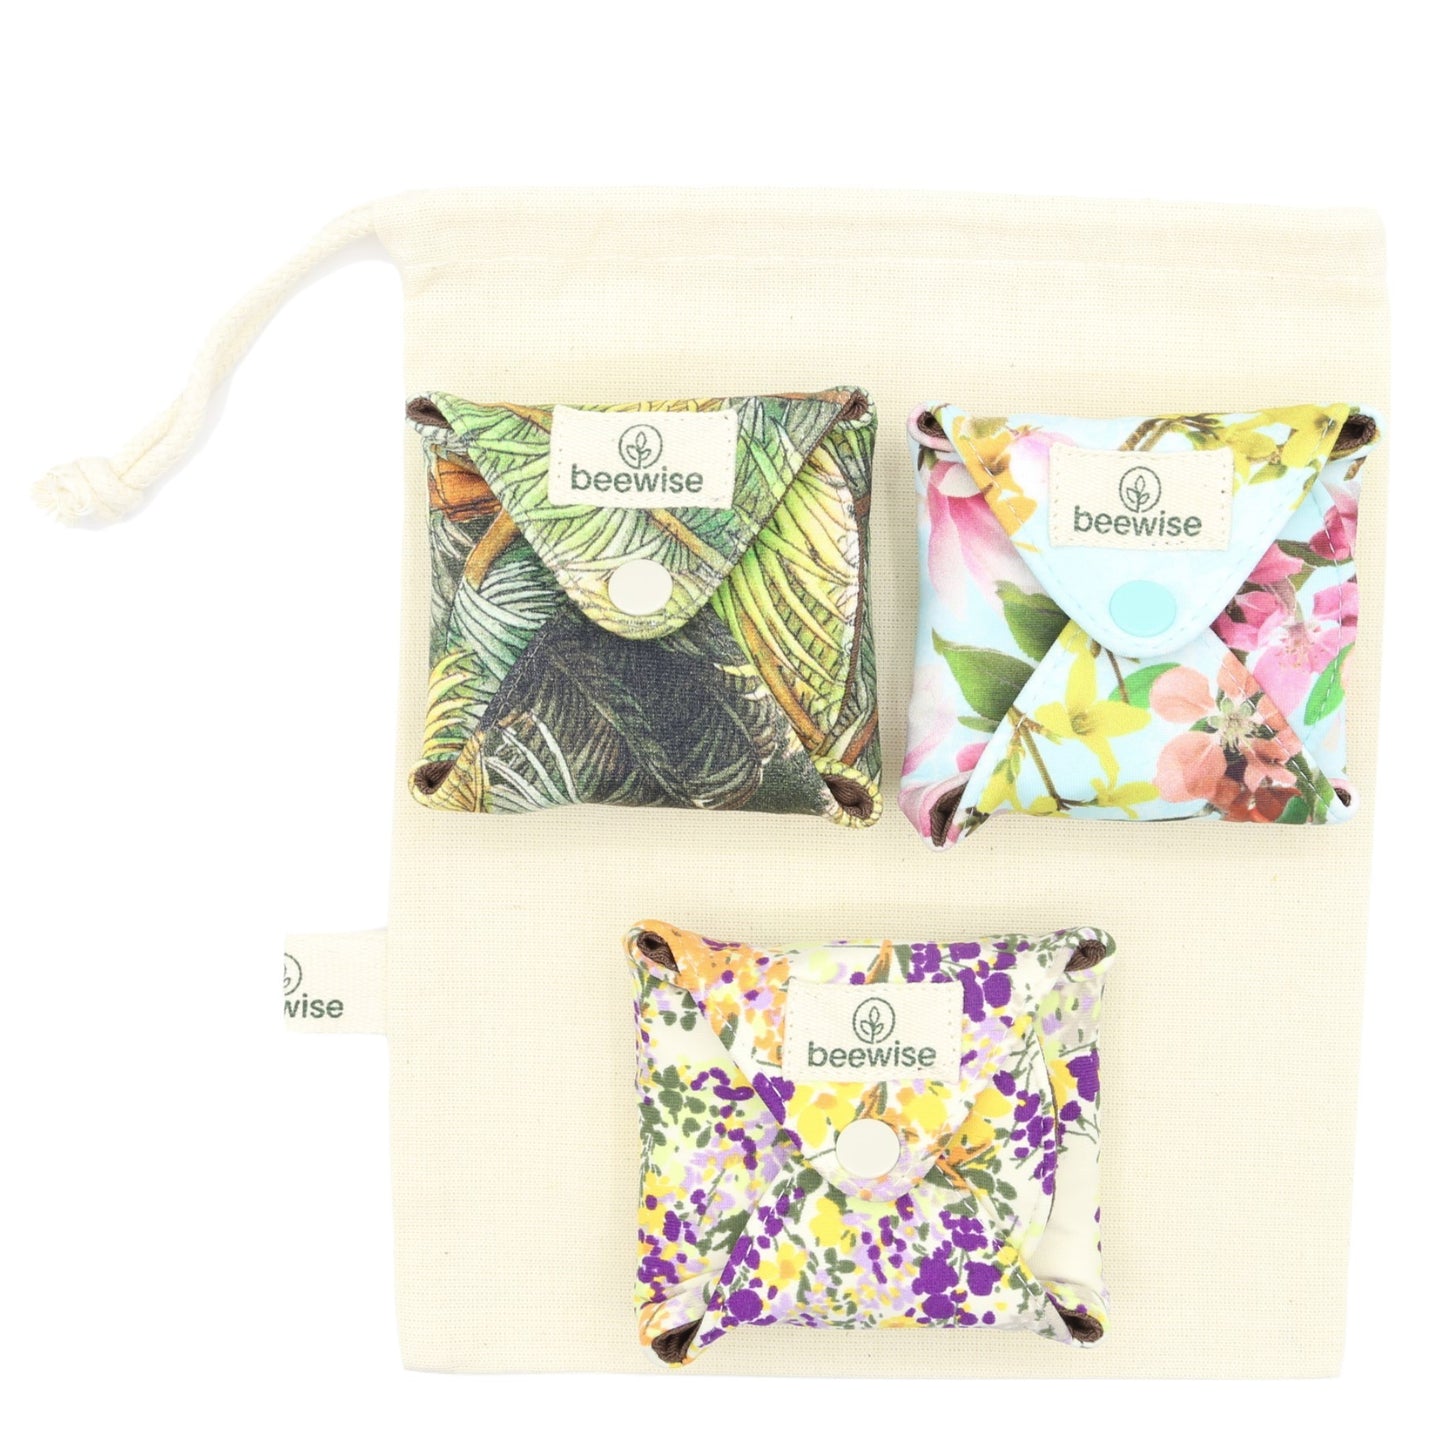 reusable menstrual pads made in brazil with cotton and a colourful green pattern set of 3 in a cotton bag